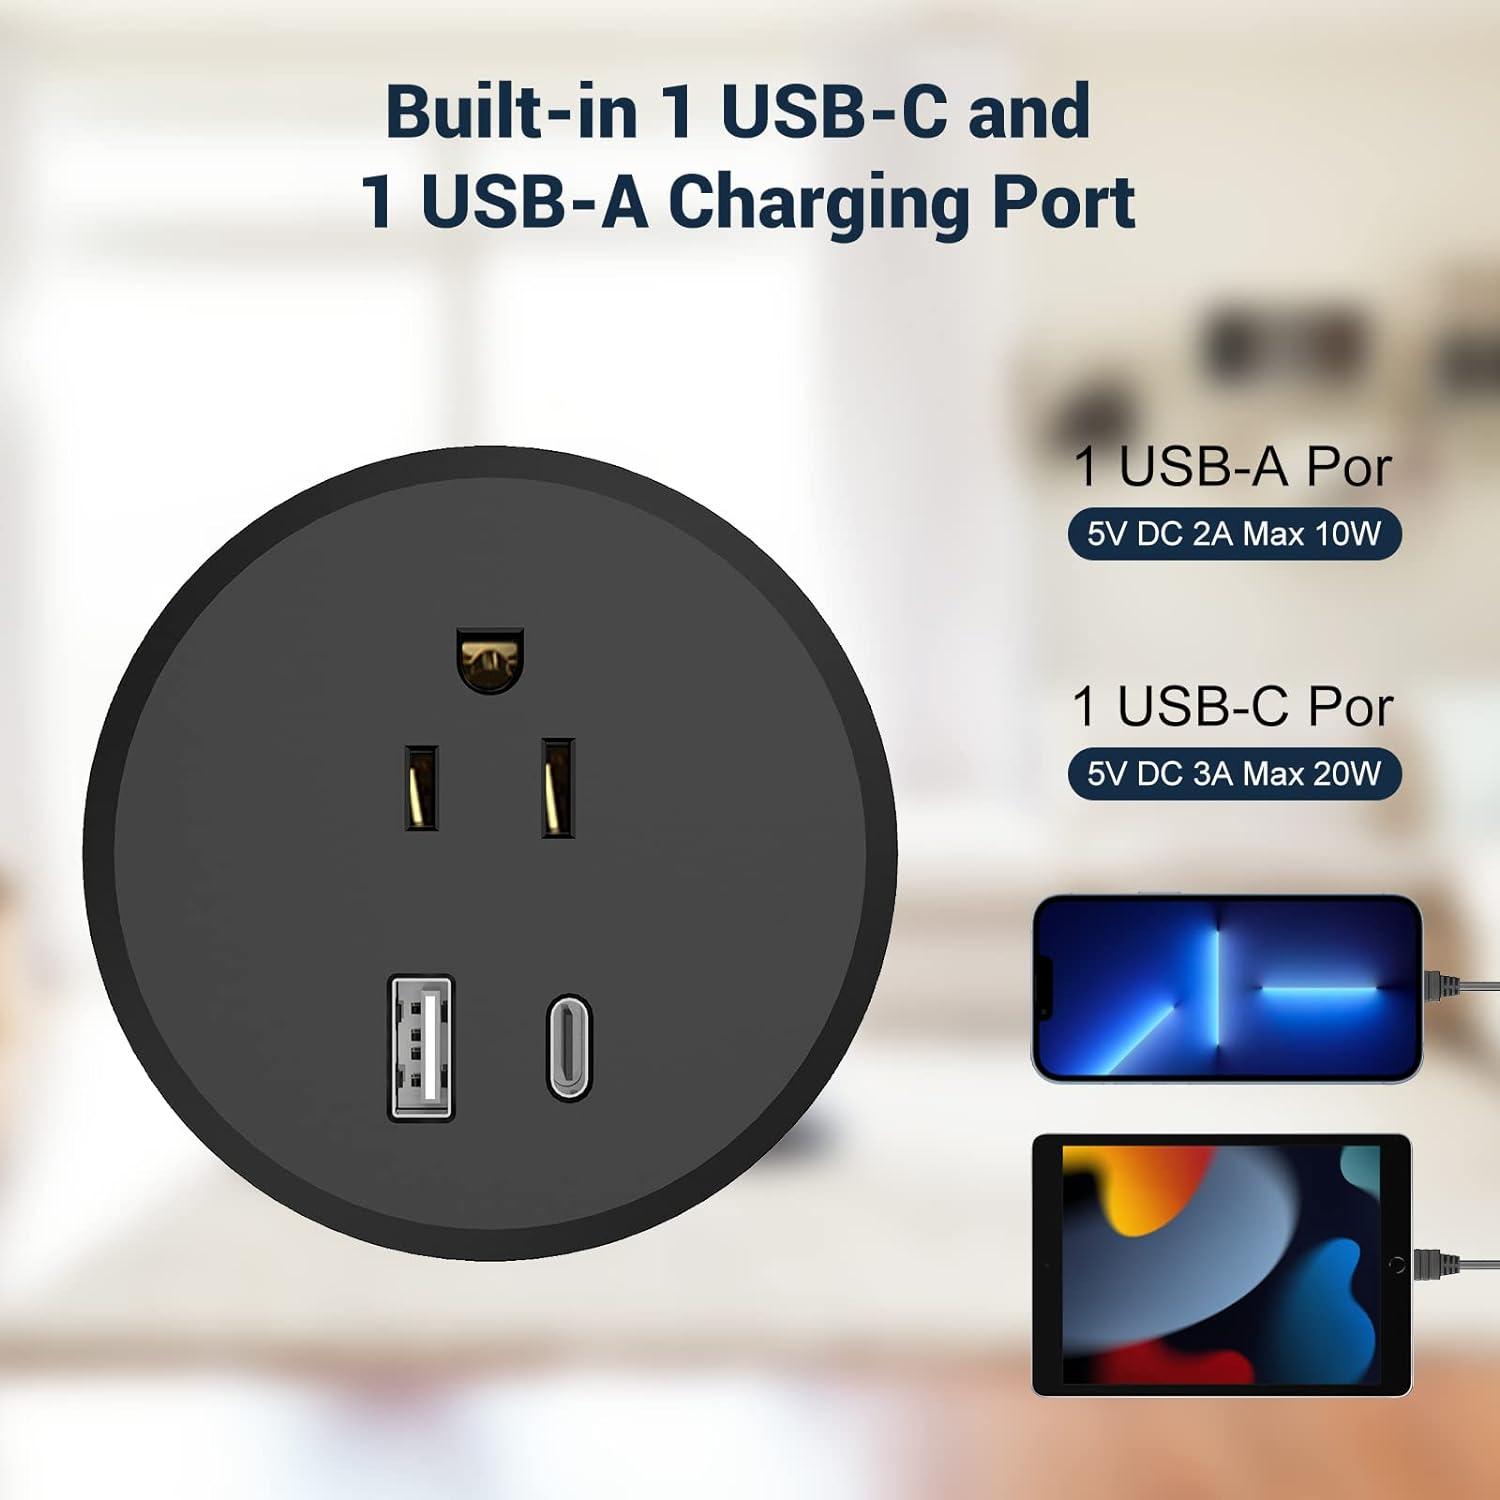 Desk Power Grommet with PD 20W USB C Port Recessed Power Desk Outlet with 1 AC  Plugs and 2 USB Ports 60mm/2 3/8 Flush Mount Grommet Power for Office Desk  Conference 6.56